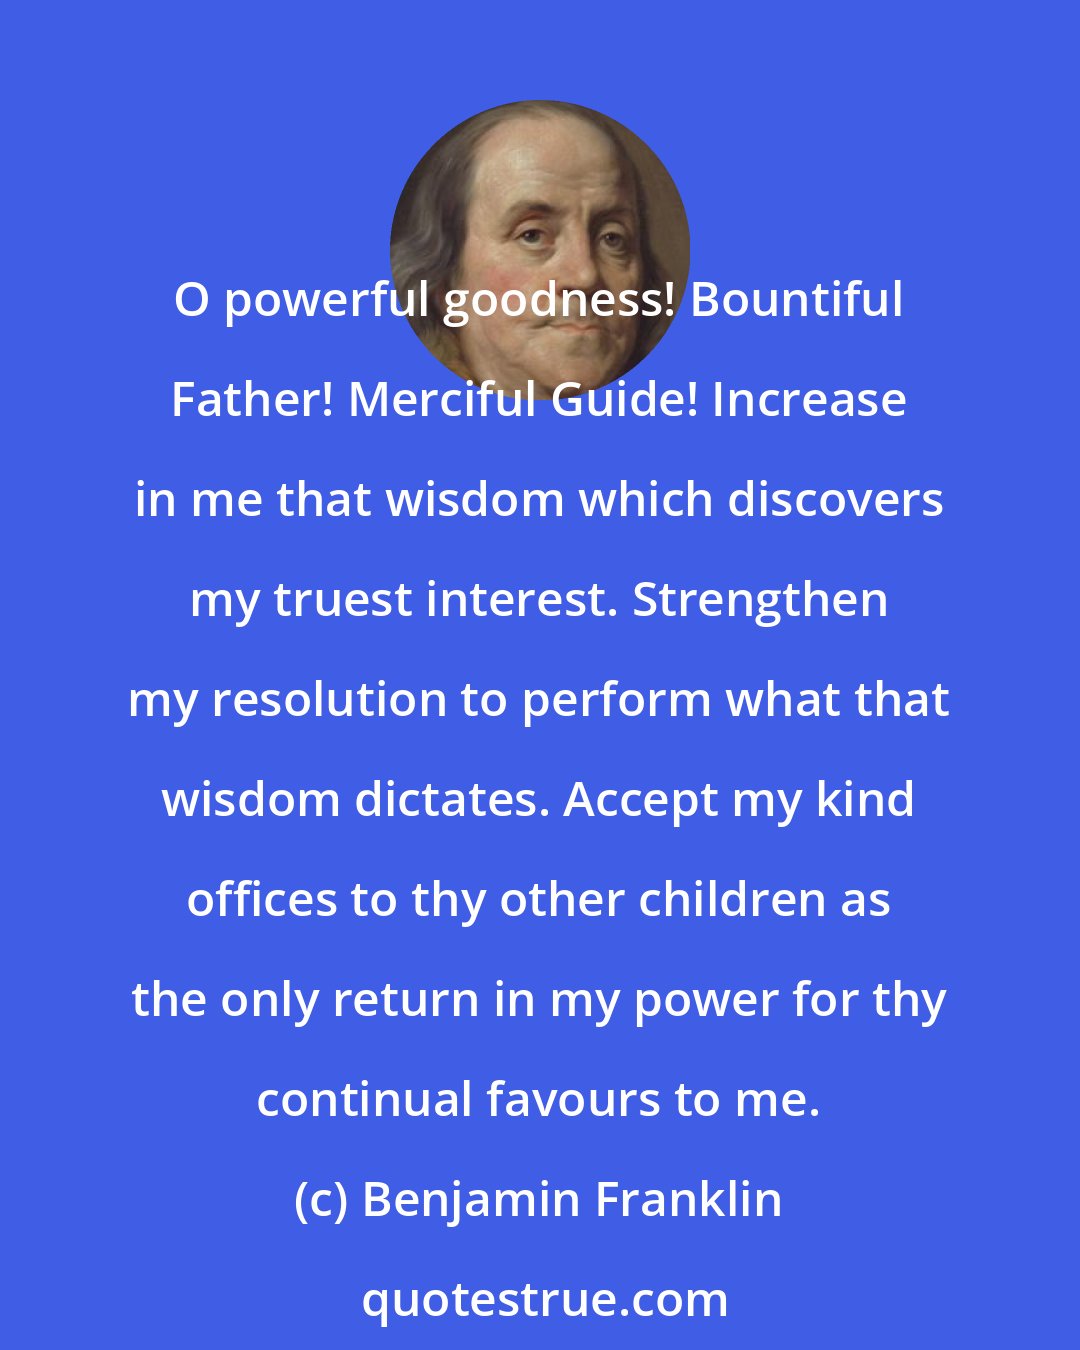 Benjamin Franklin: O powerful goodness! Bountiful Father! Merciful Guide! Increase in me that wisdom which discovers my truest interest. Strengthen my resolution to perform what that wisdom dictates. Accept my kind offices to thy other children as the only return in my power for thy continual favours to me.